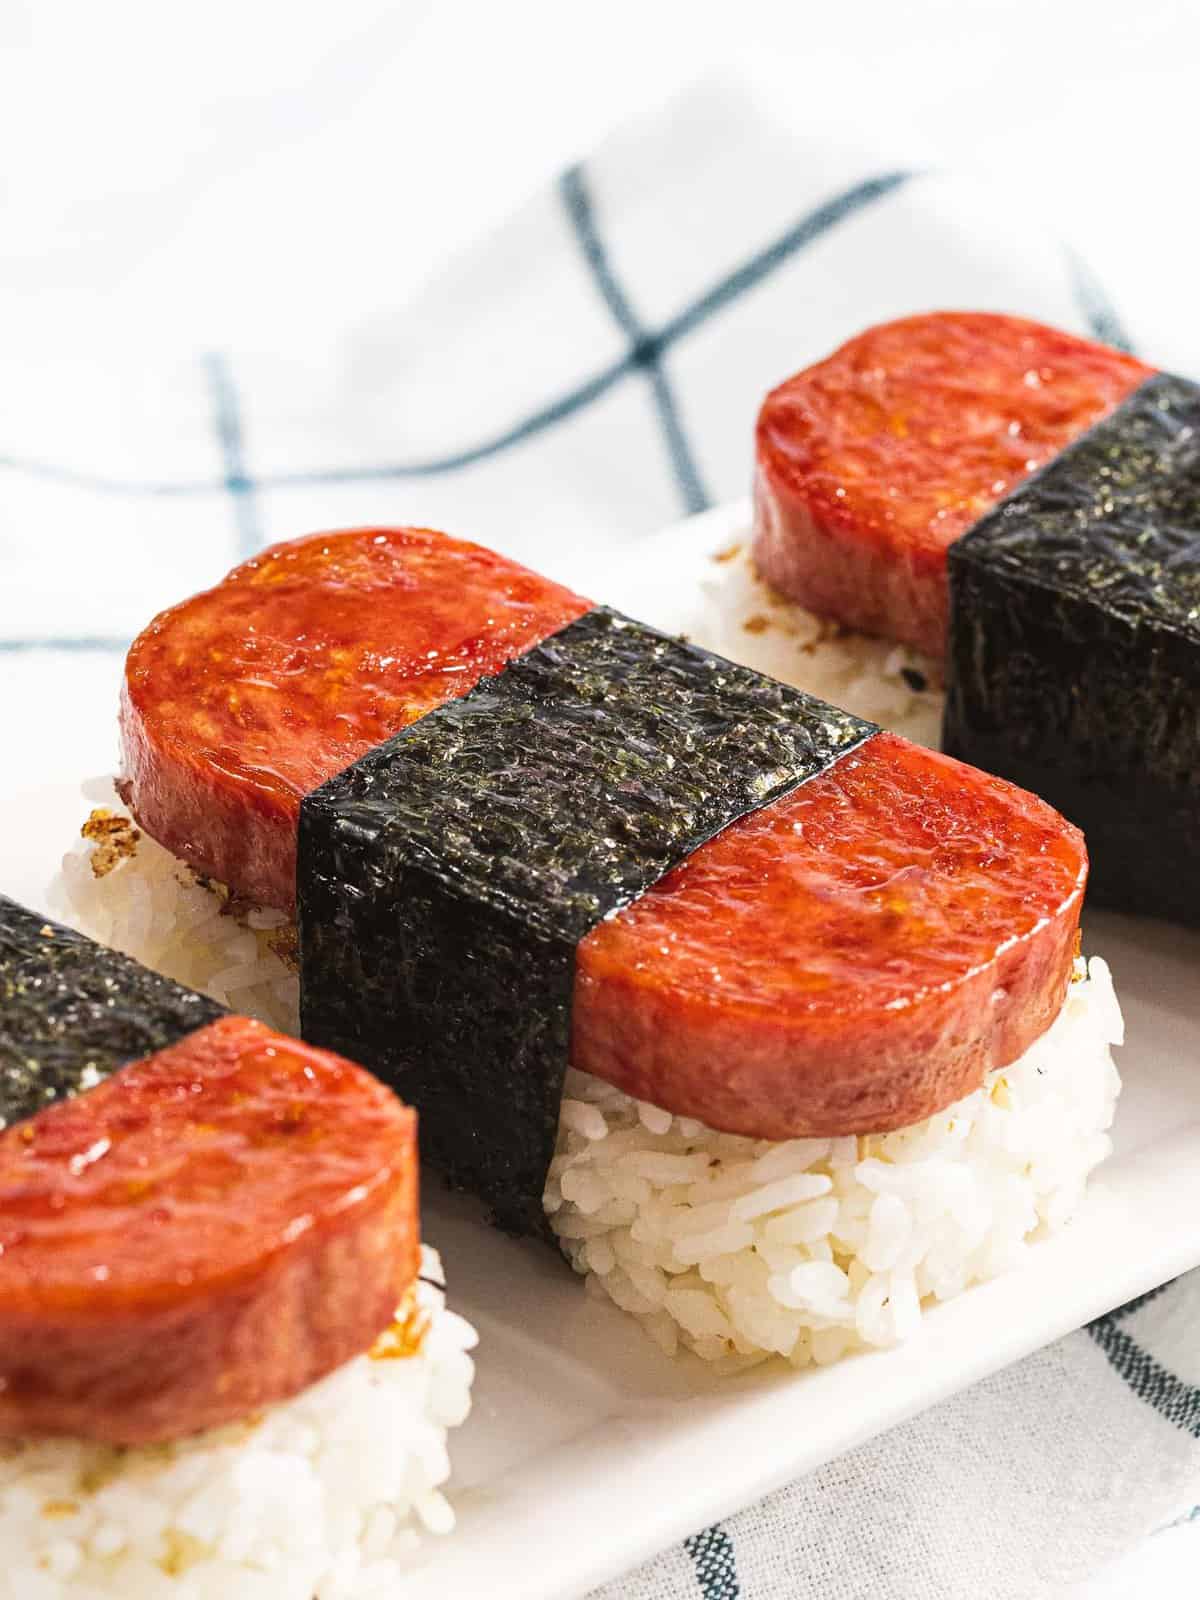 Spam musubi, rice topped with spam and wrapped in nori.